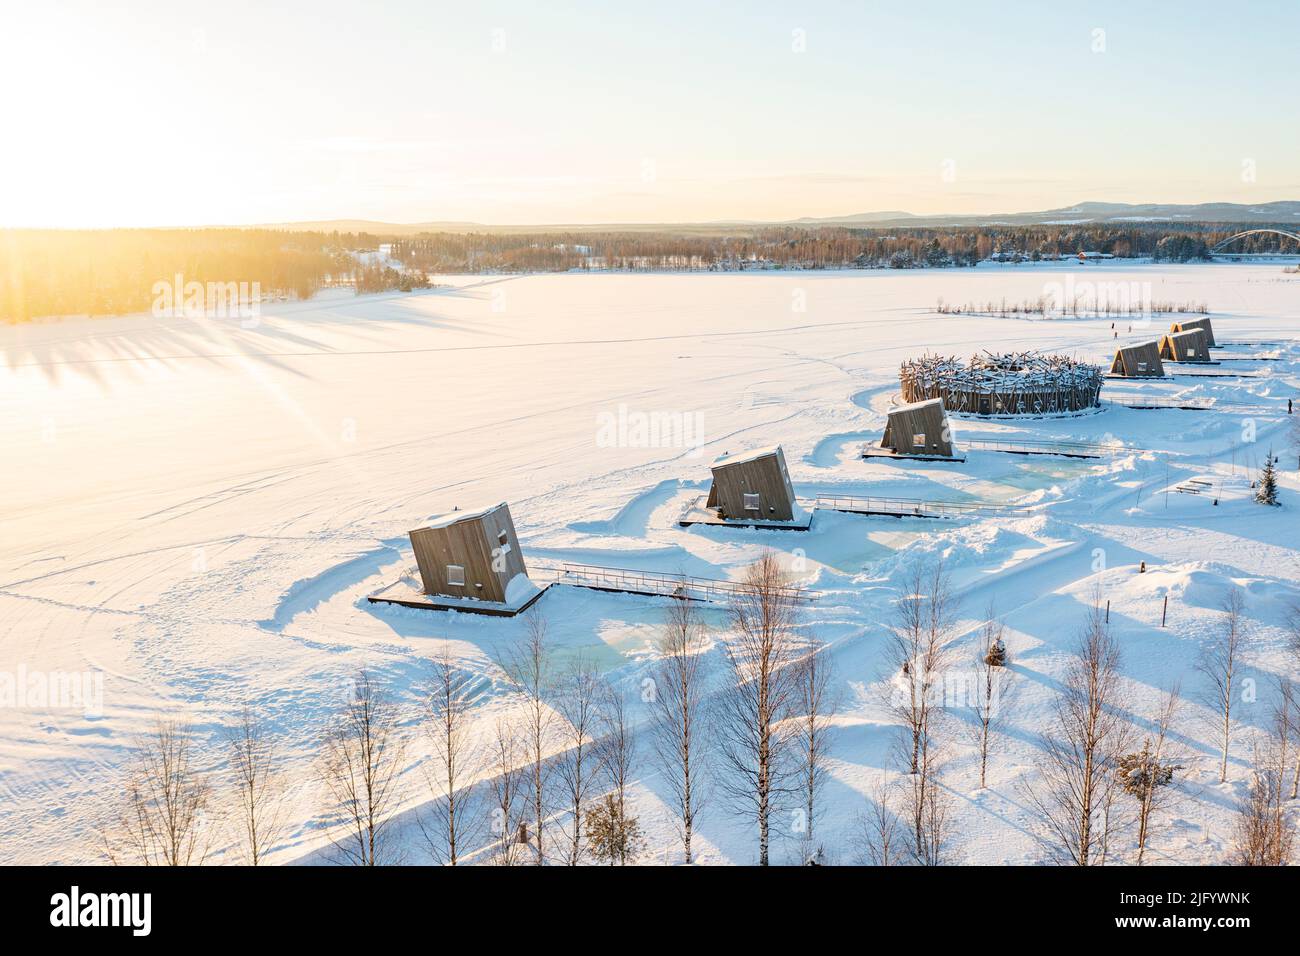 Wooden cabins rooms of the luxury Arctic Bath Spa Hotel floating on frozen river Lule covered with snow, Harads, Lapland, Sweden, Scandinavia, Europe Stock Photo